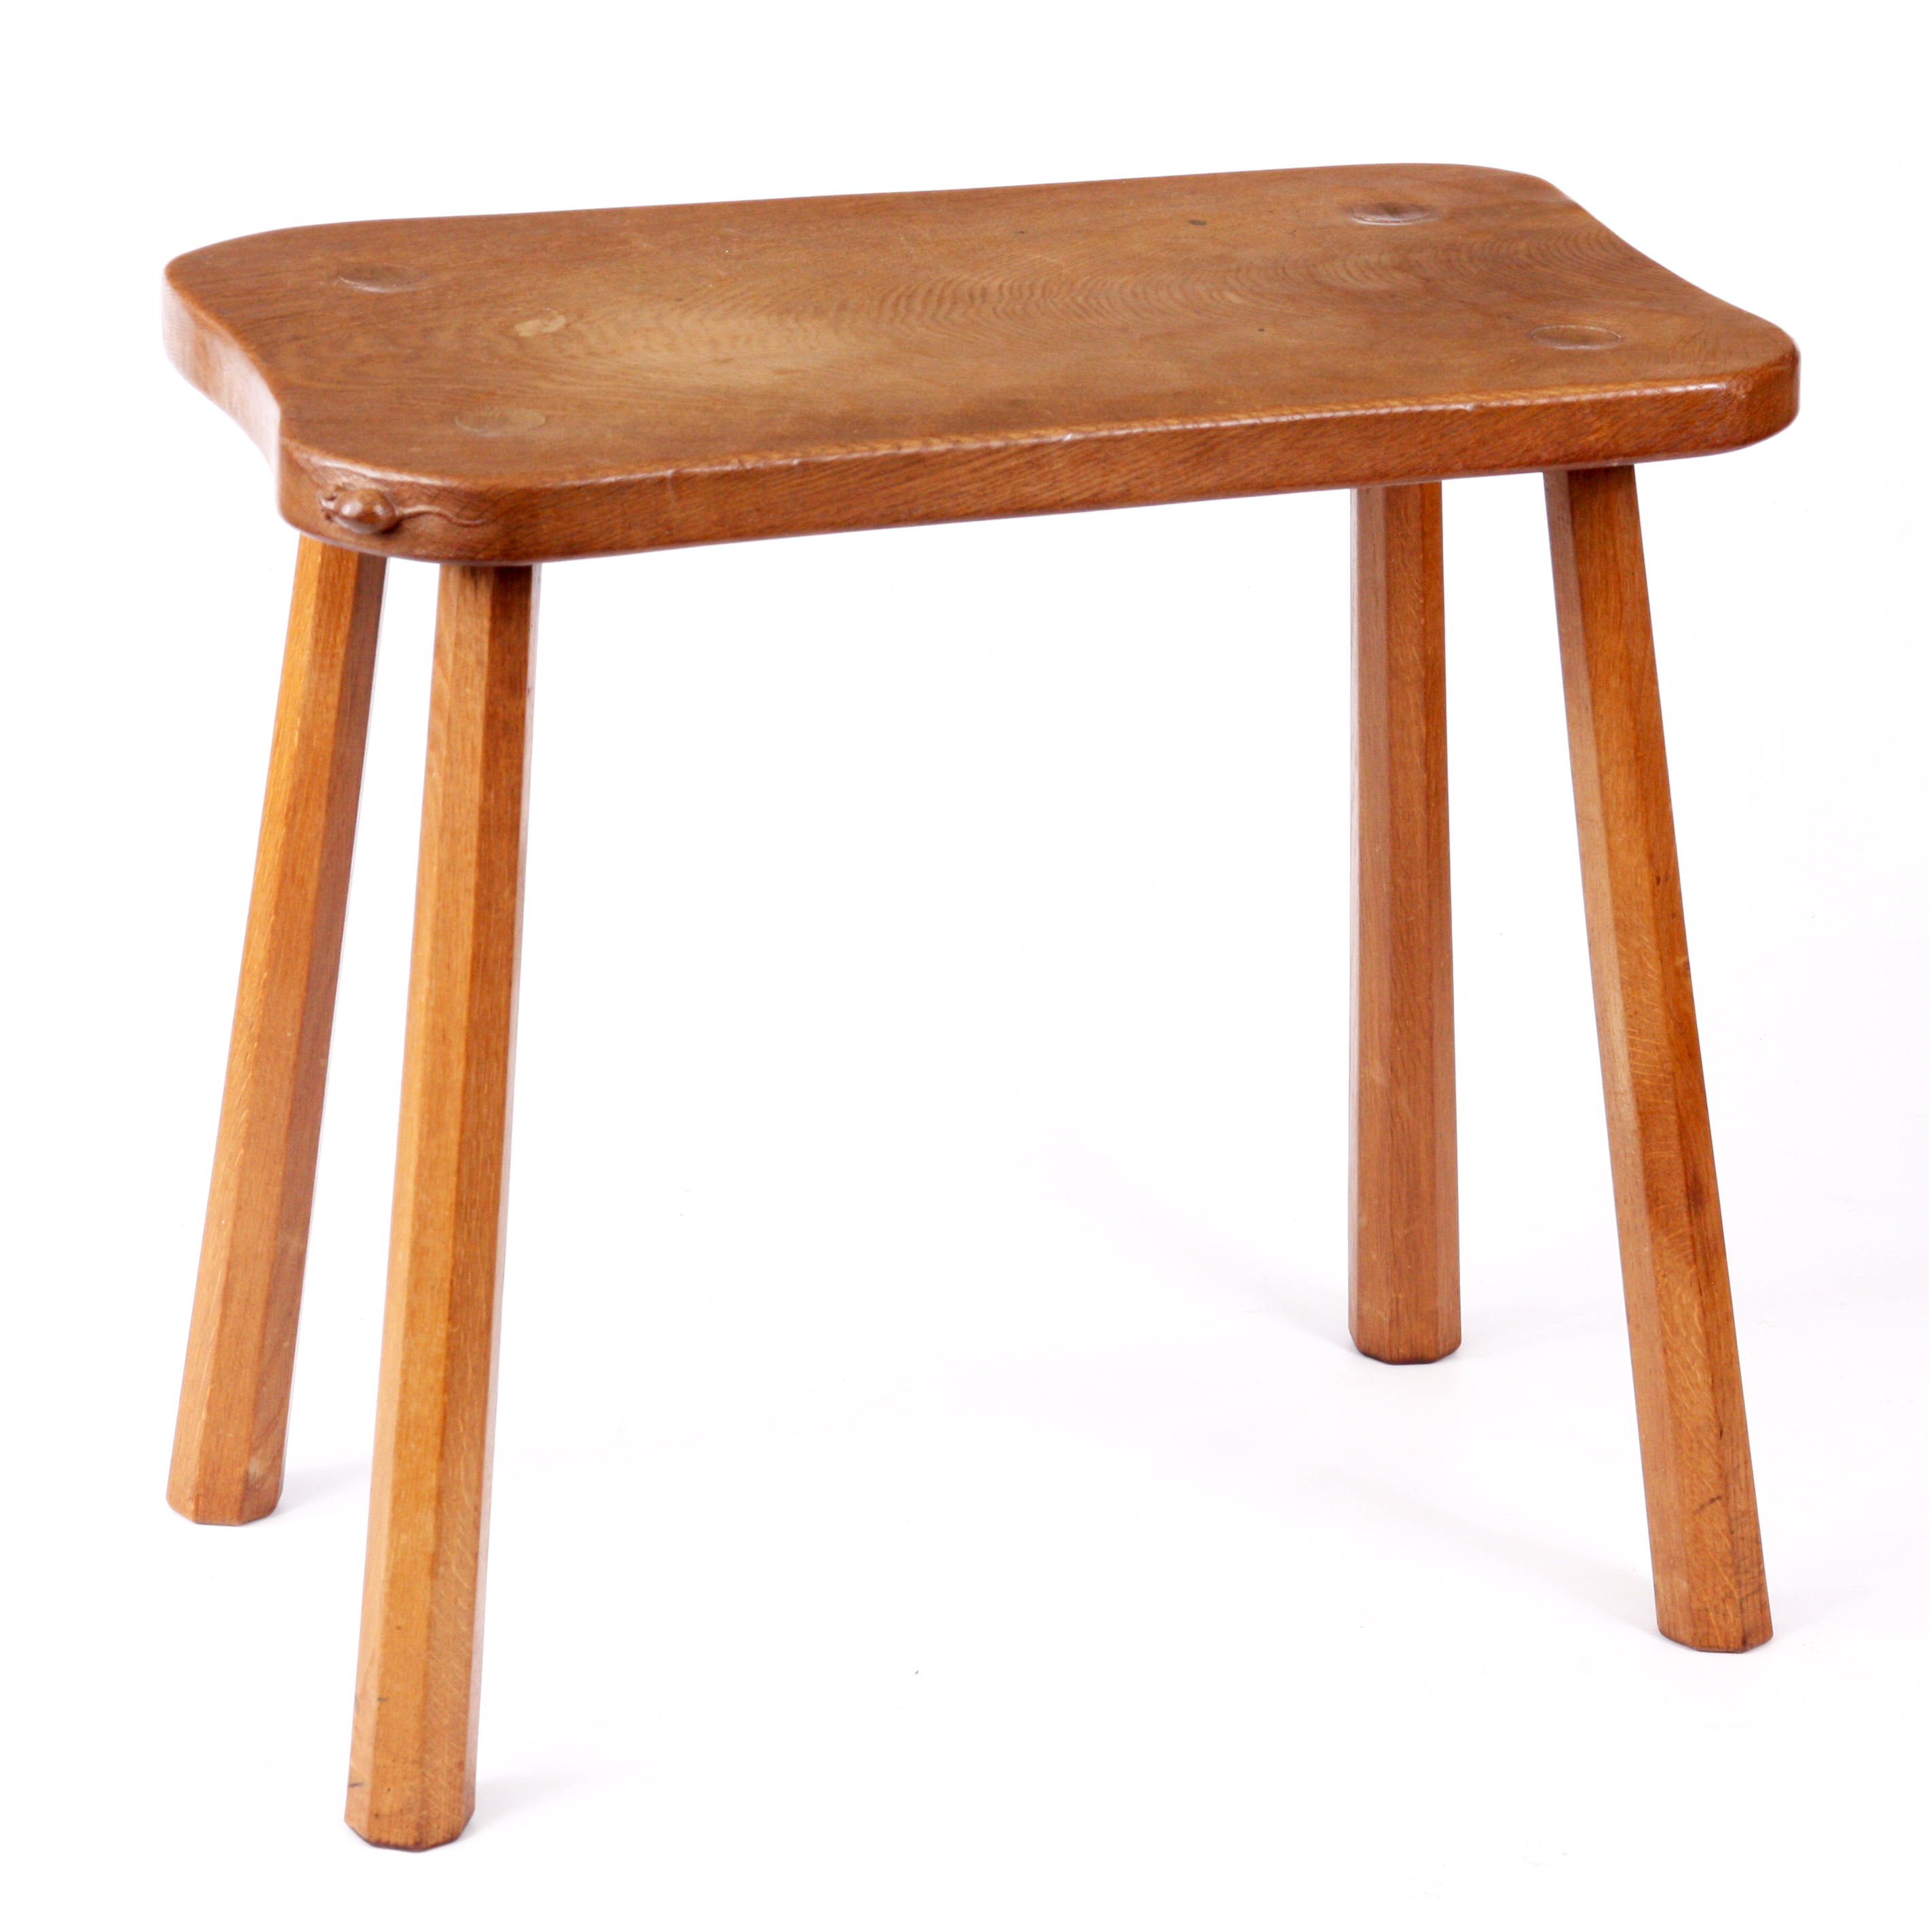 A ROBERT “MOUSEMAN” THOMPSON AZED OAK SIDE TABLE with dished shaped top, standing on hexagonal